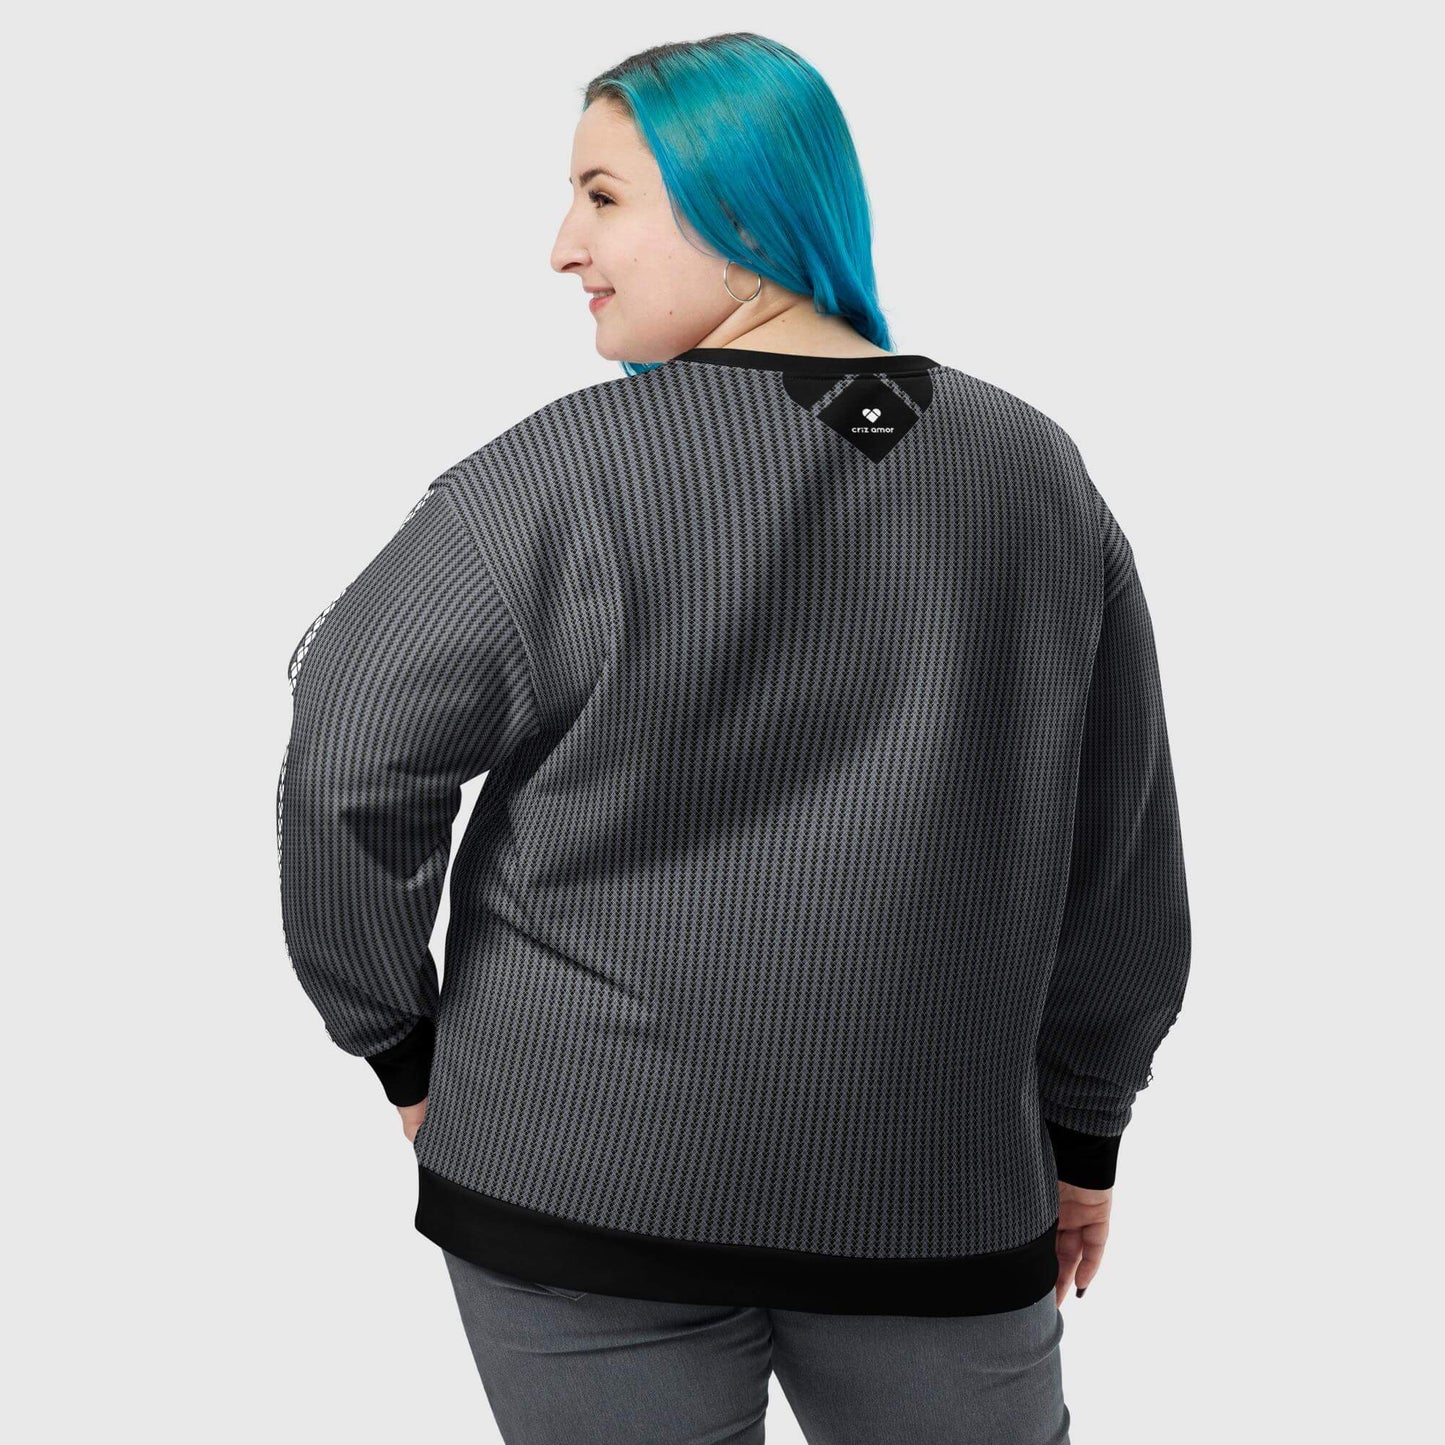 back view of a A limited edition sweatshirt from CRiZ AMOR's Amor Primero Capsule Collection, featuring heart-shaped geometrical logos in two shades of gray